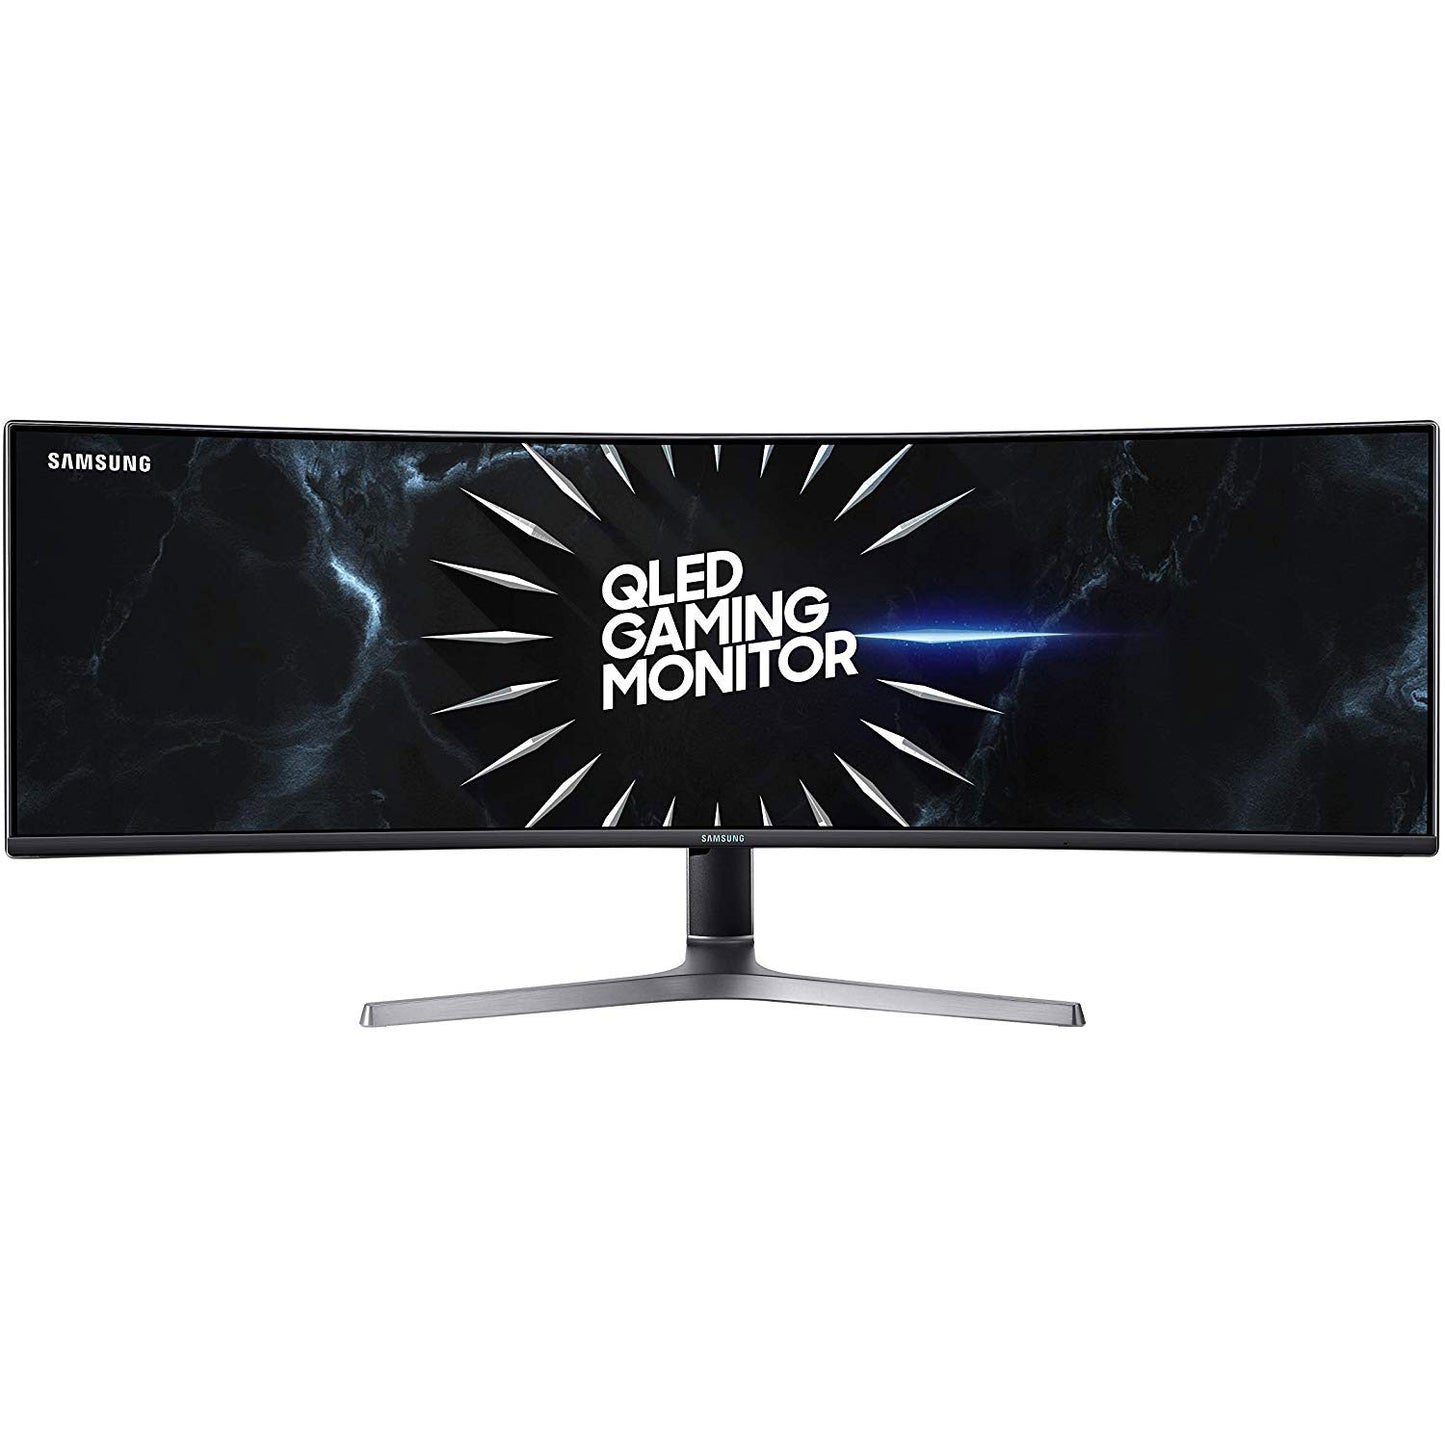 Samsung 49-Inch CRG90 Curved Gaming Monitor 120Hz Refresh, Ultrawide Screen, 5120 x 1440p Resolution, 4ms Response, FreeSync 2 with HDR, HDMI